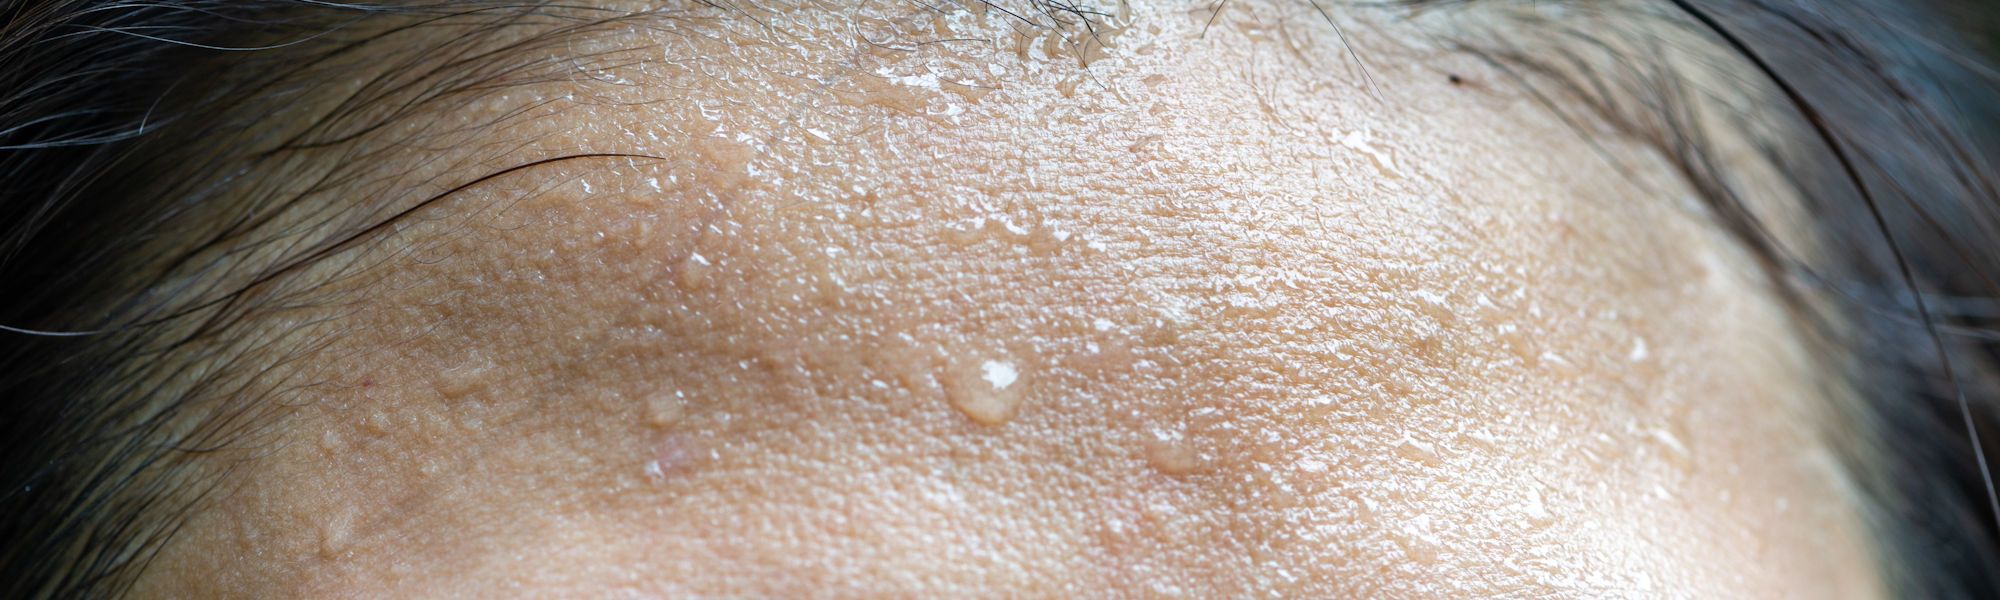 Hyperhidrosis facialis - excessive sweating in the facial area